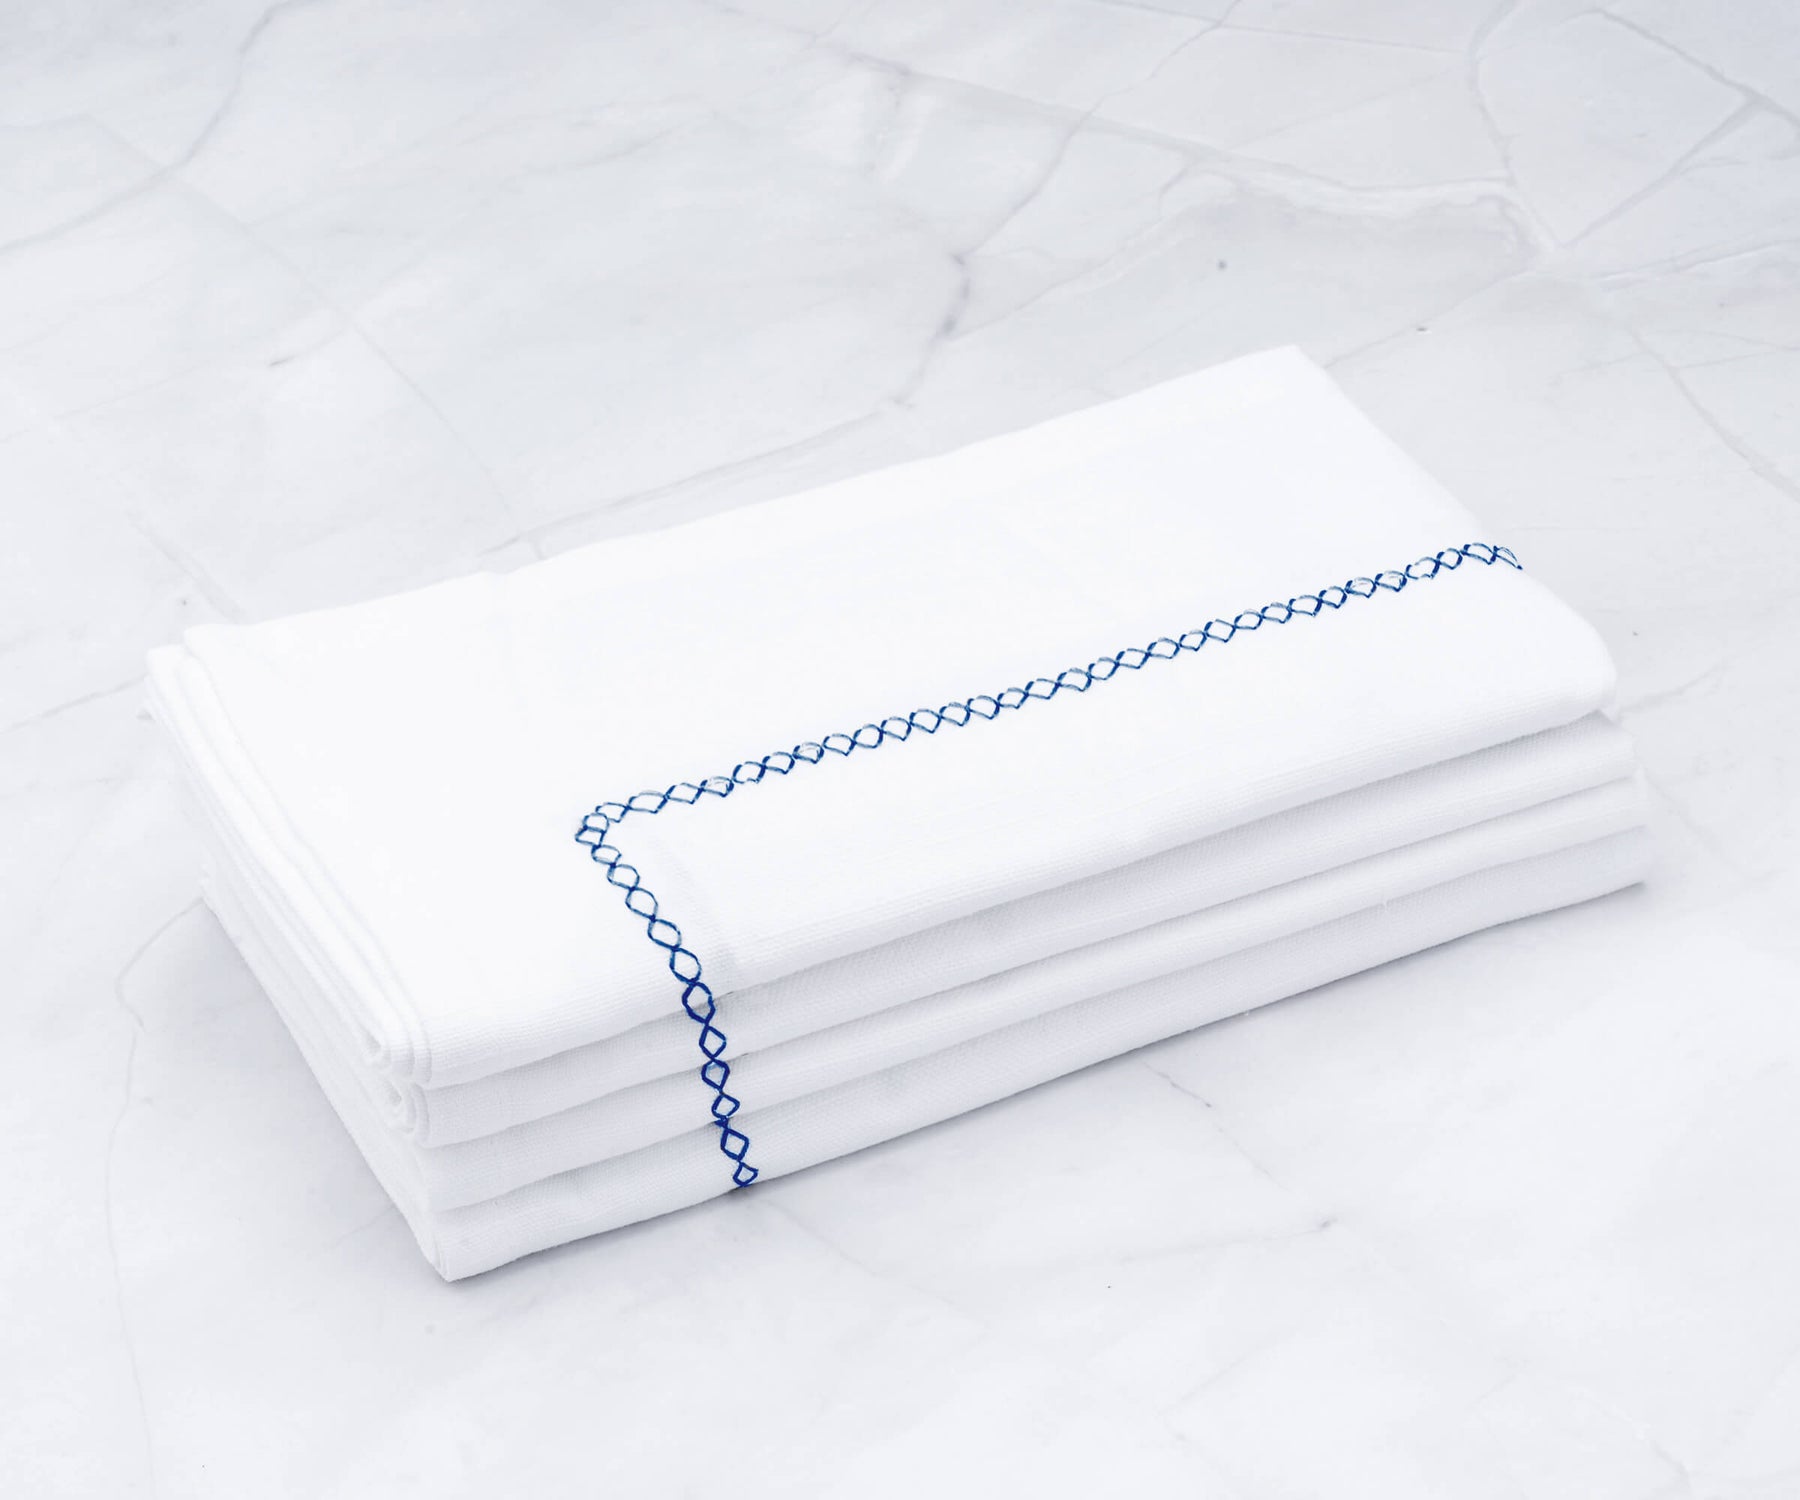 Folded Dinner Napkins come in a variety of designs, ranging from delicate floral patterns